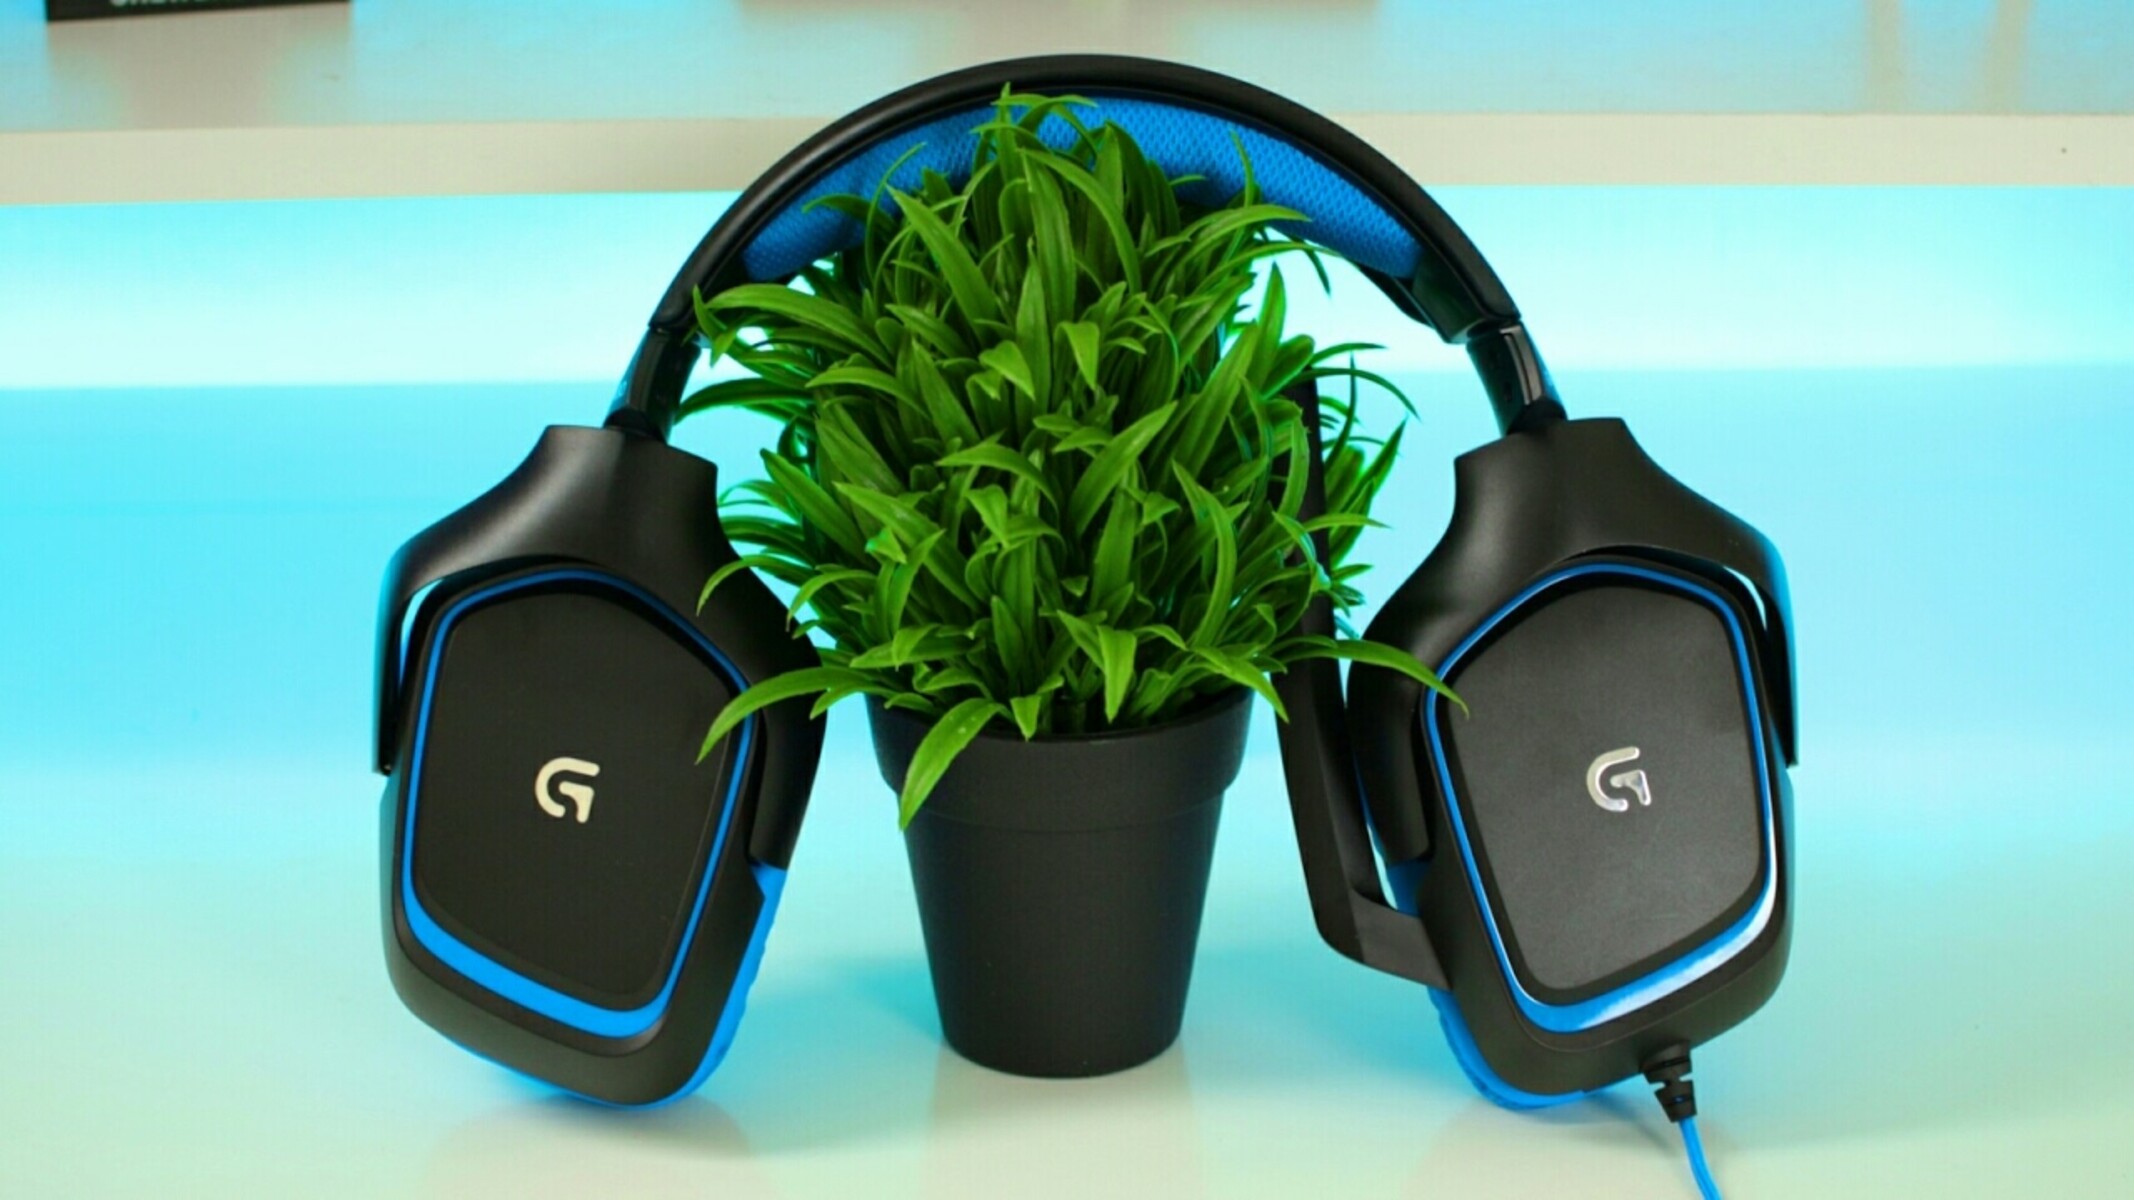 Logitech G430 USB Connector Circumaural Surround Sound Gaming Headset: How Long Is The Cord